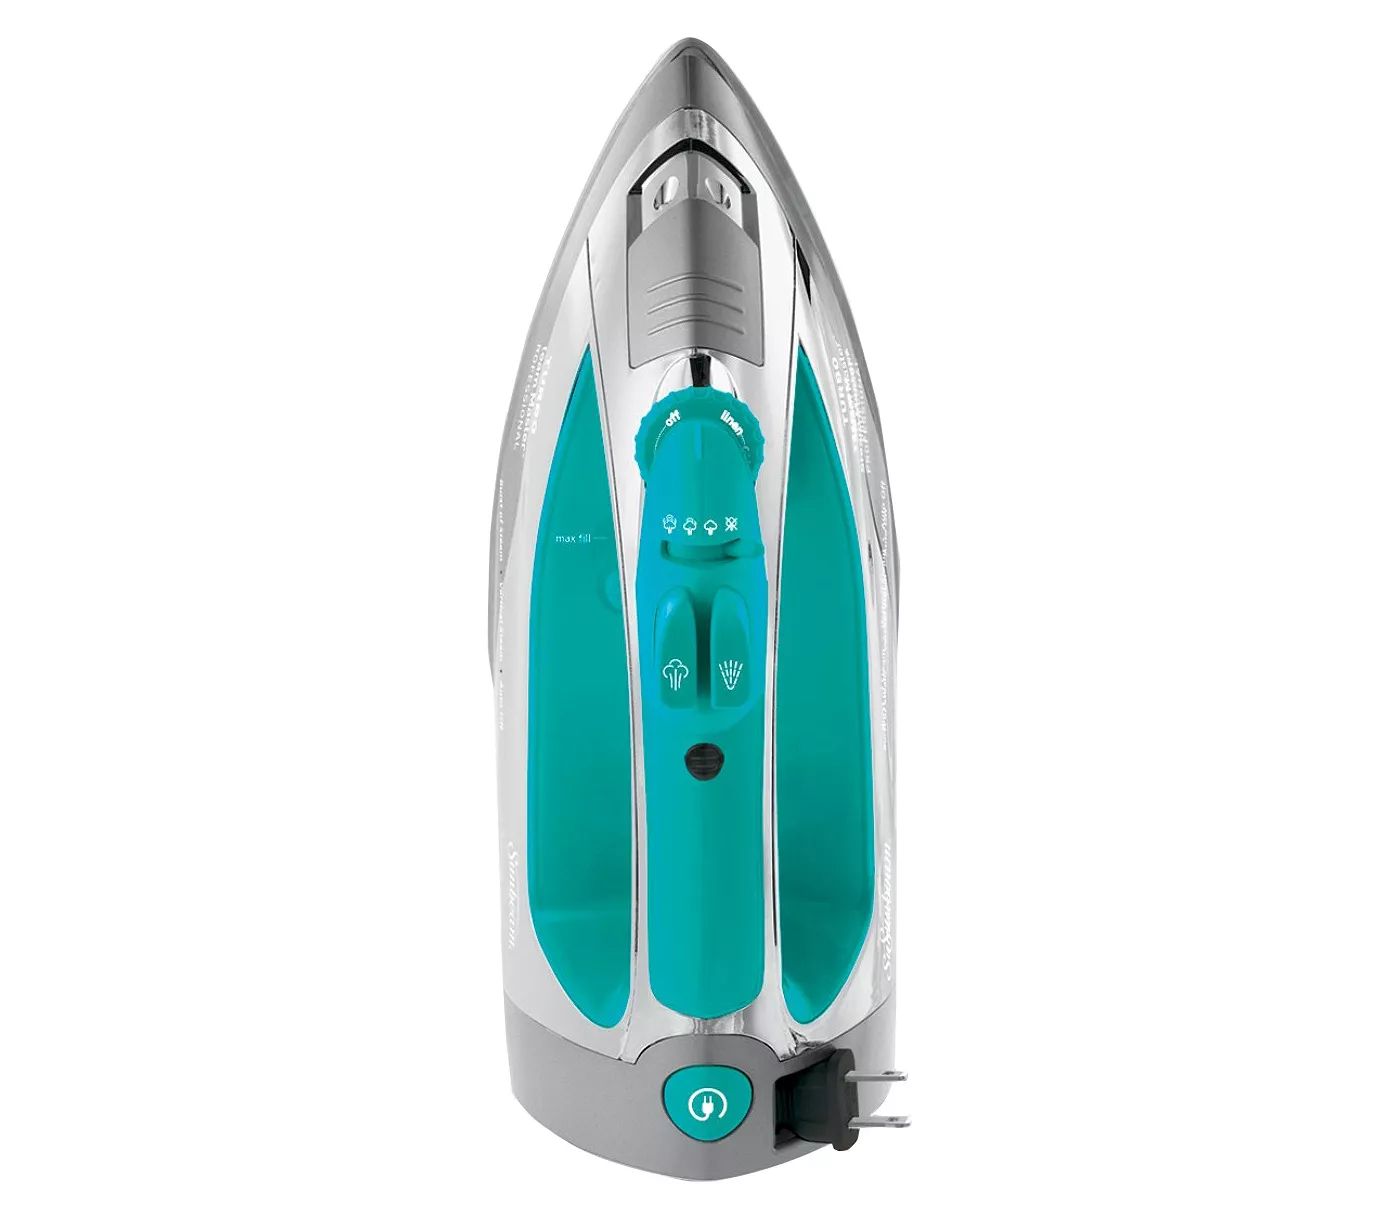 Sunbeam Steamaster Iron With Retractable Cord - Teal - image 2 of 10